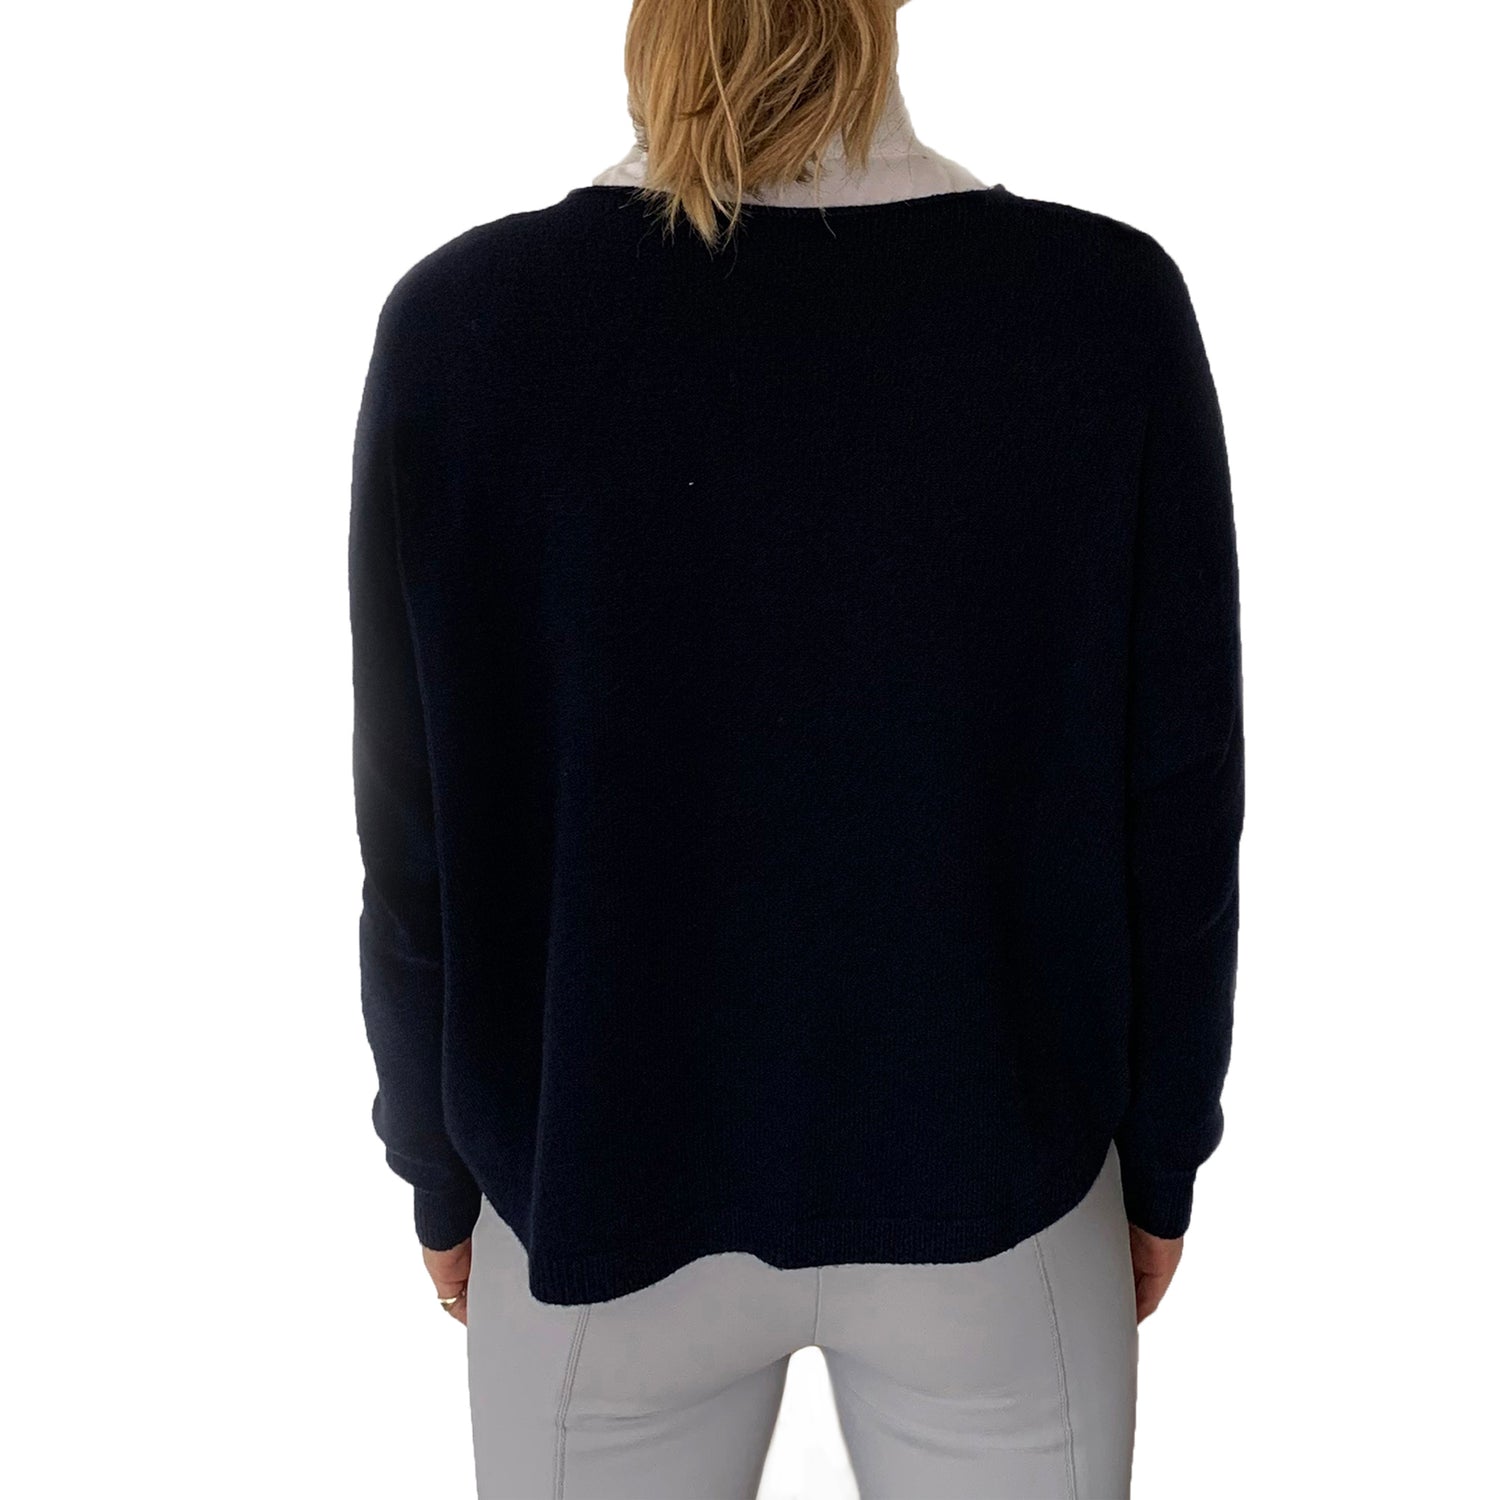 Round Neck jumper with front pocket detail.  This versatile jumper is super soft and an easy piece to have in your wardrobe. Great for shows when its a but chilly or equally usable on the yard.   50% Viscose  27%polyester  23% Polyamide